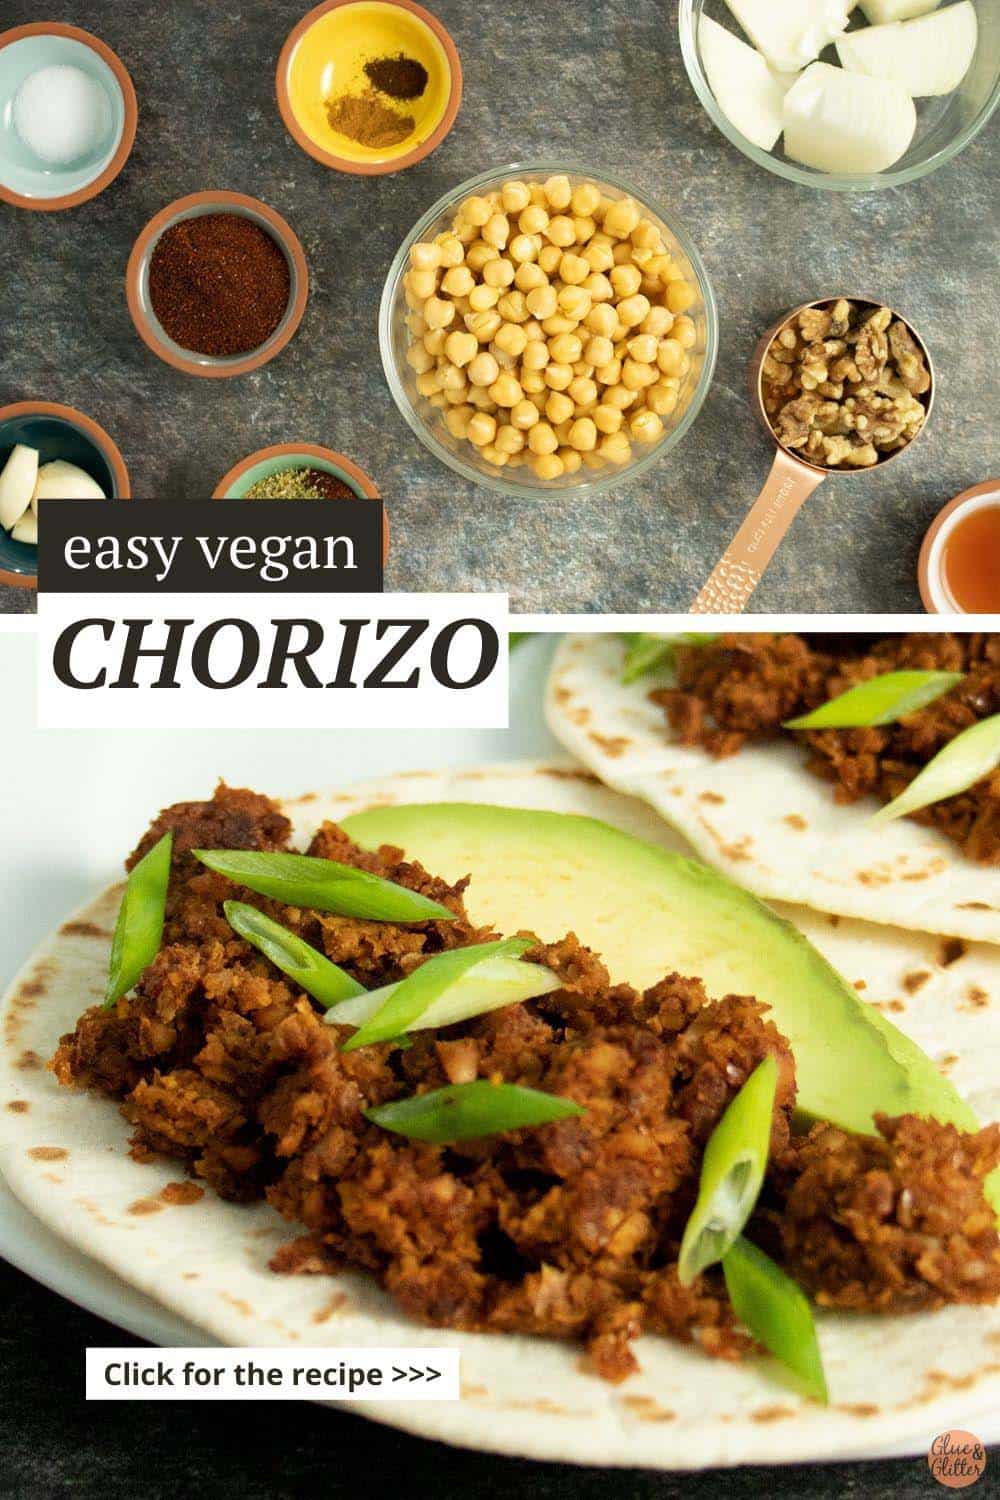 image collage showing chickpeas, walnuts, and spices in bowls on a slate table and a close-up of a vegan chorizo taco